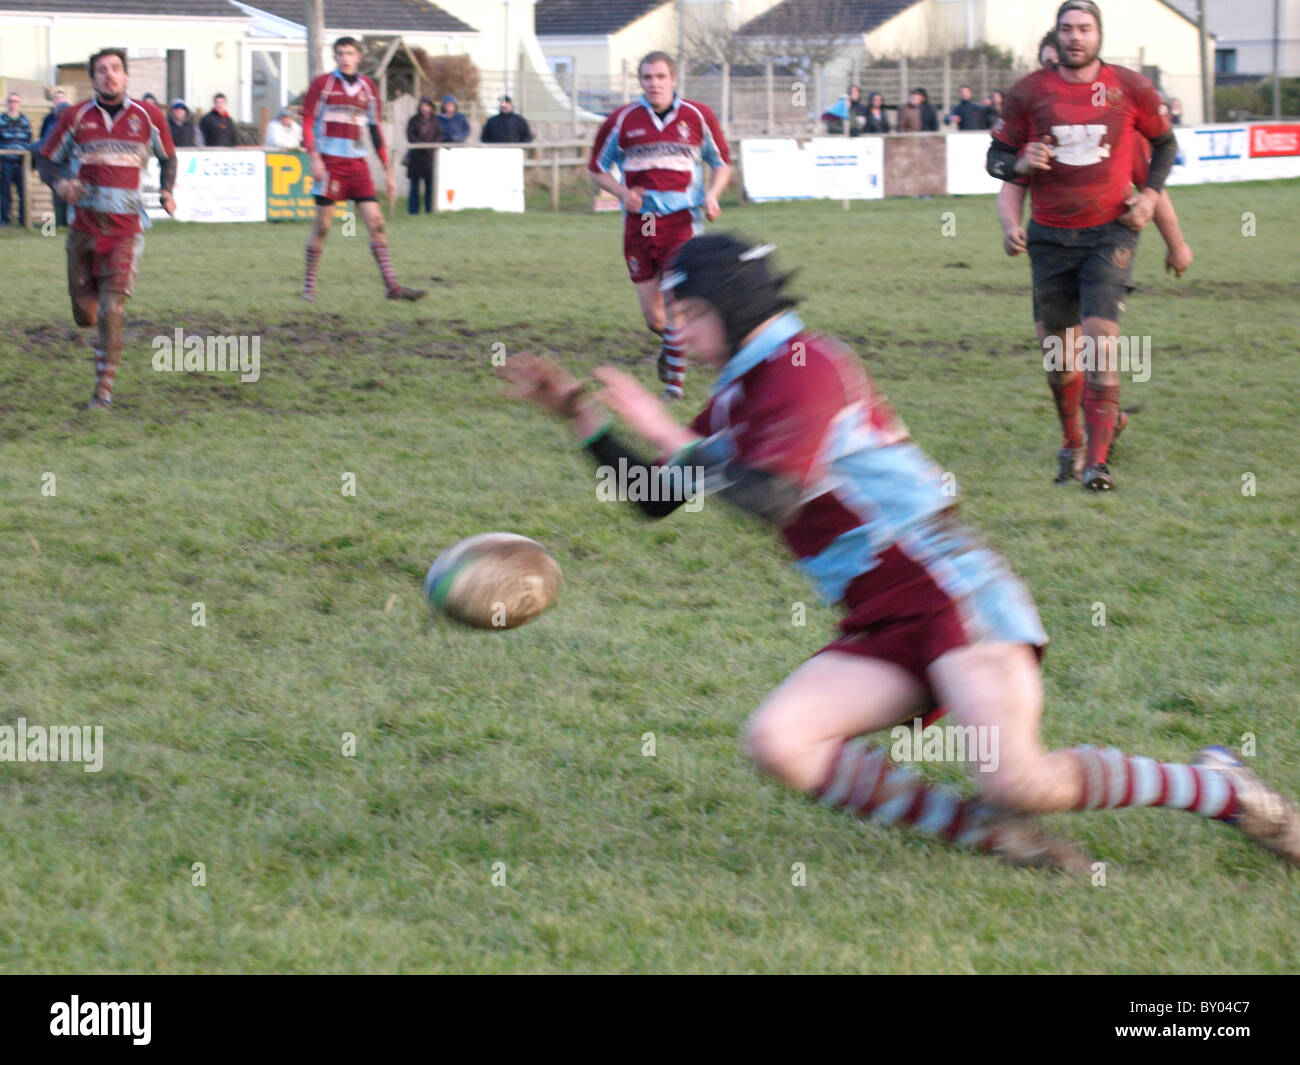 Diving on a loose ball to score a try, Amateur rugby match Bude RFC Versus Exeter Saracens, UK Stock Photo